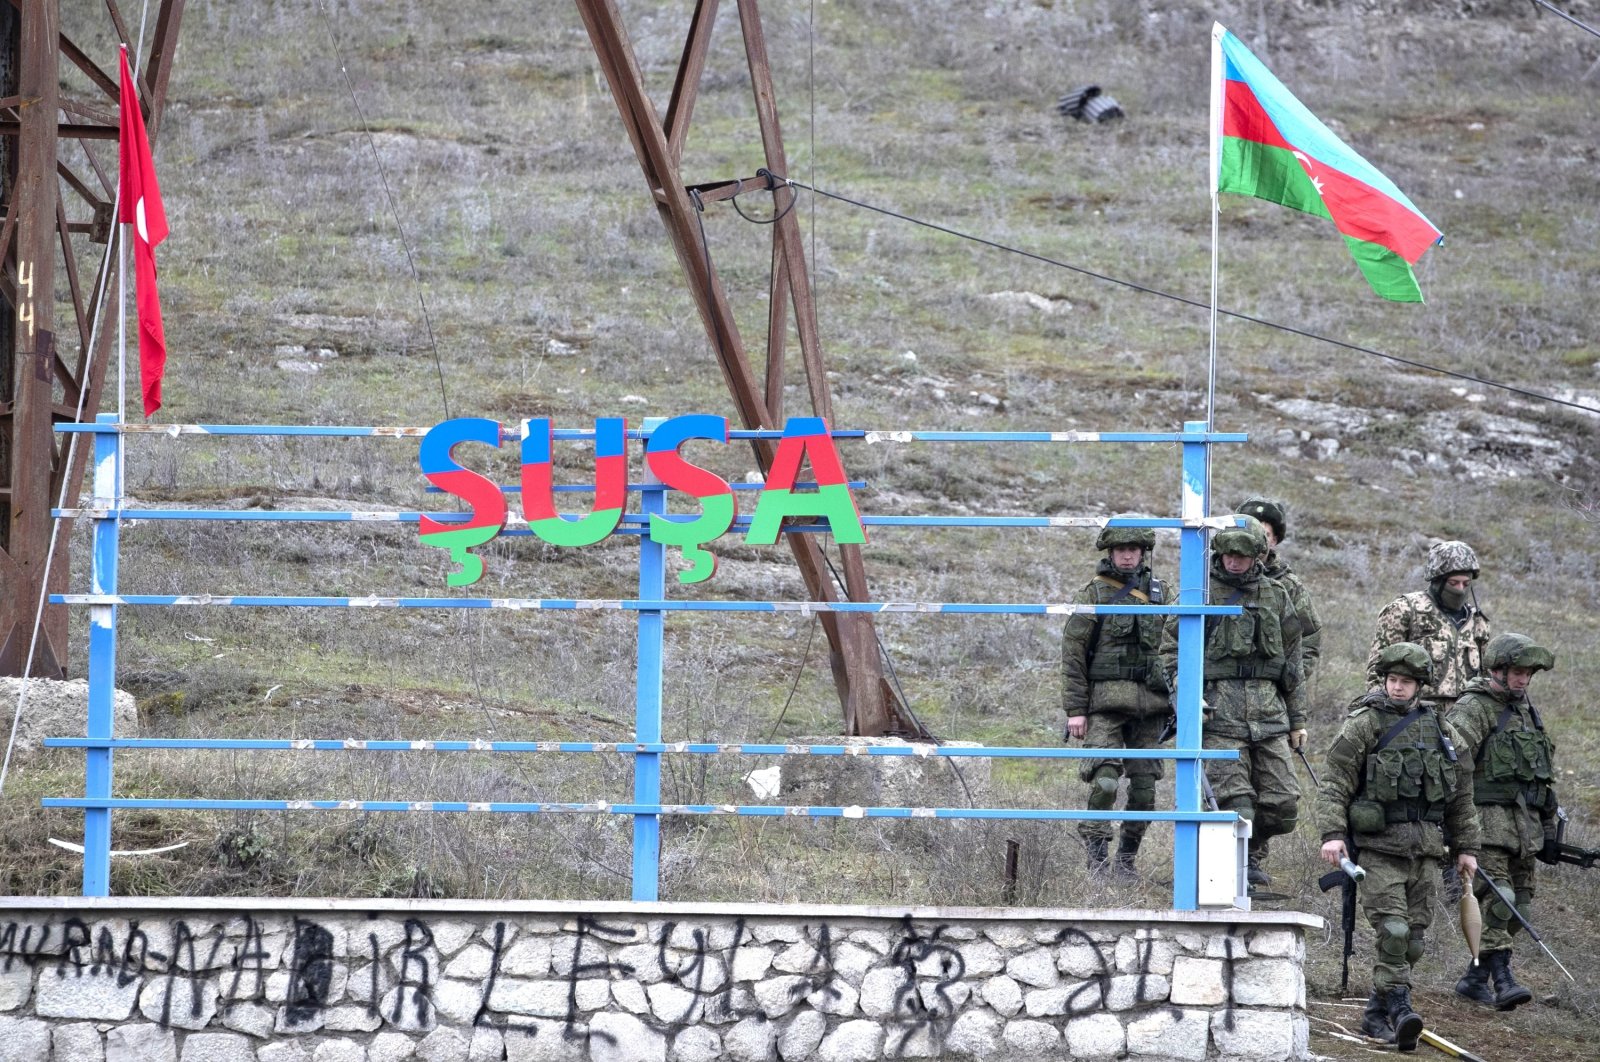 Russian peacekeepers and Azerbaijani servicepeople patrol the area at the entrance to the town of Shusha, Azerbaijan, Nov. 26, 2020. (Photo by Getty Images)